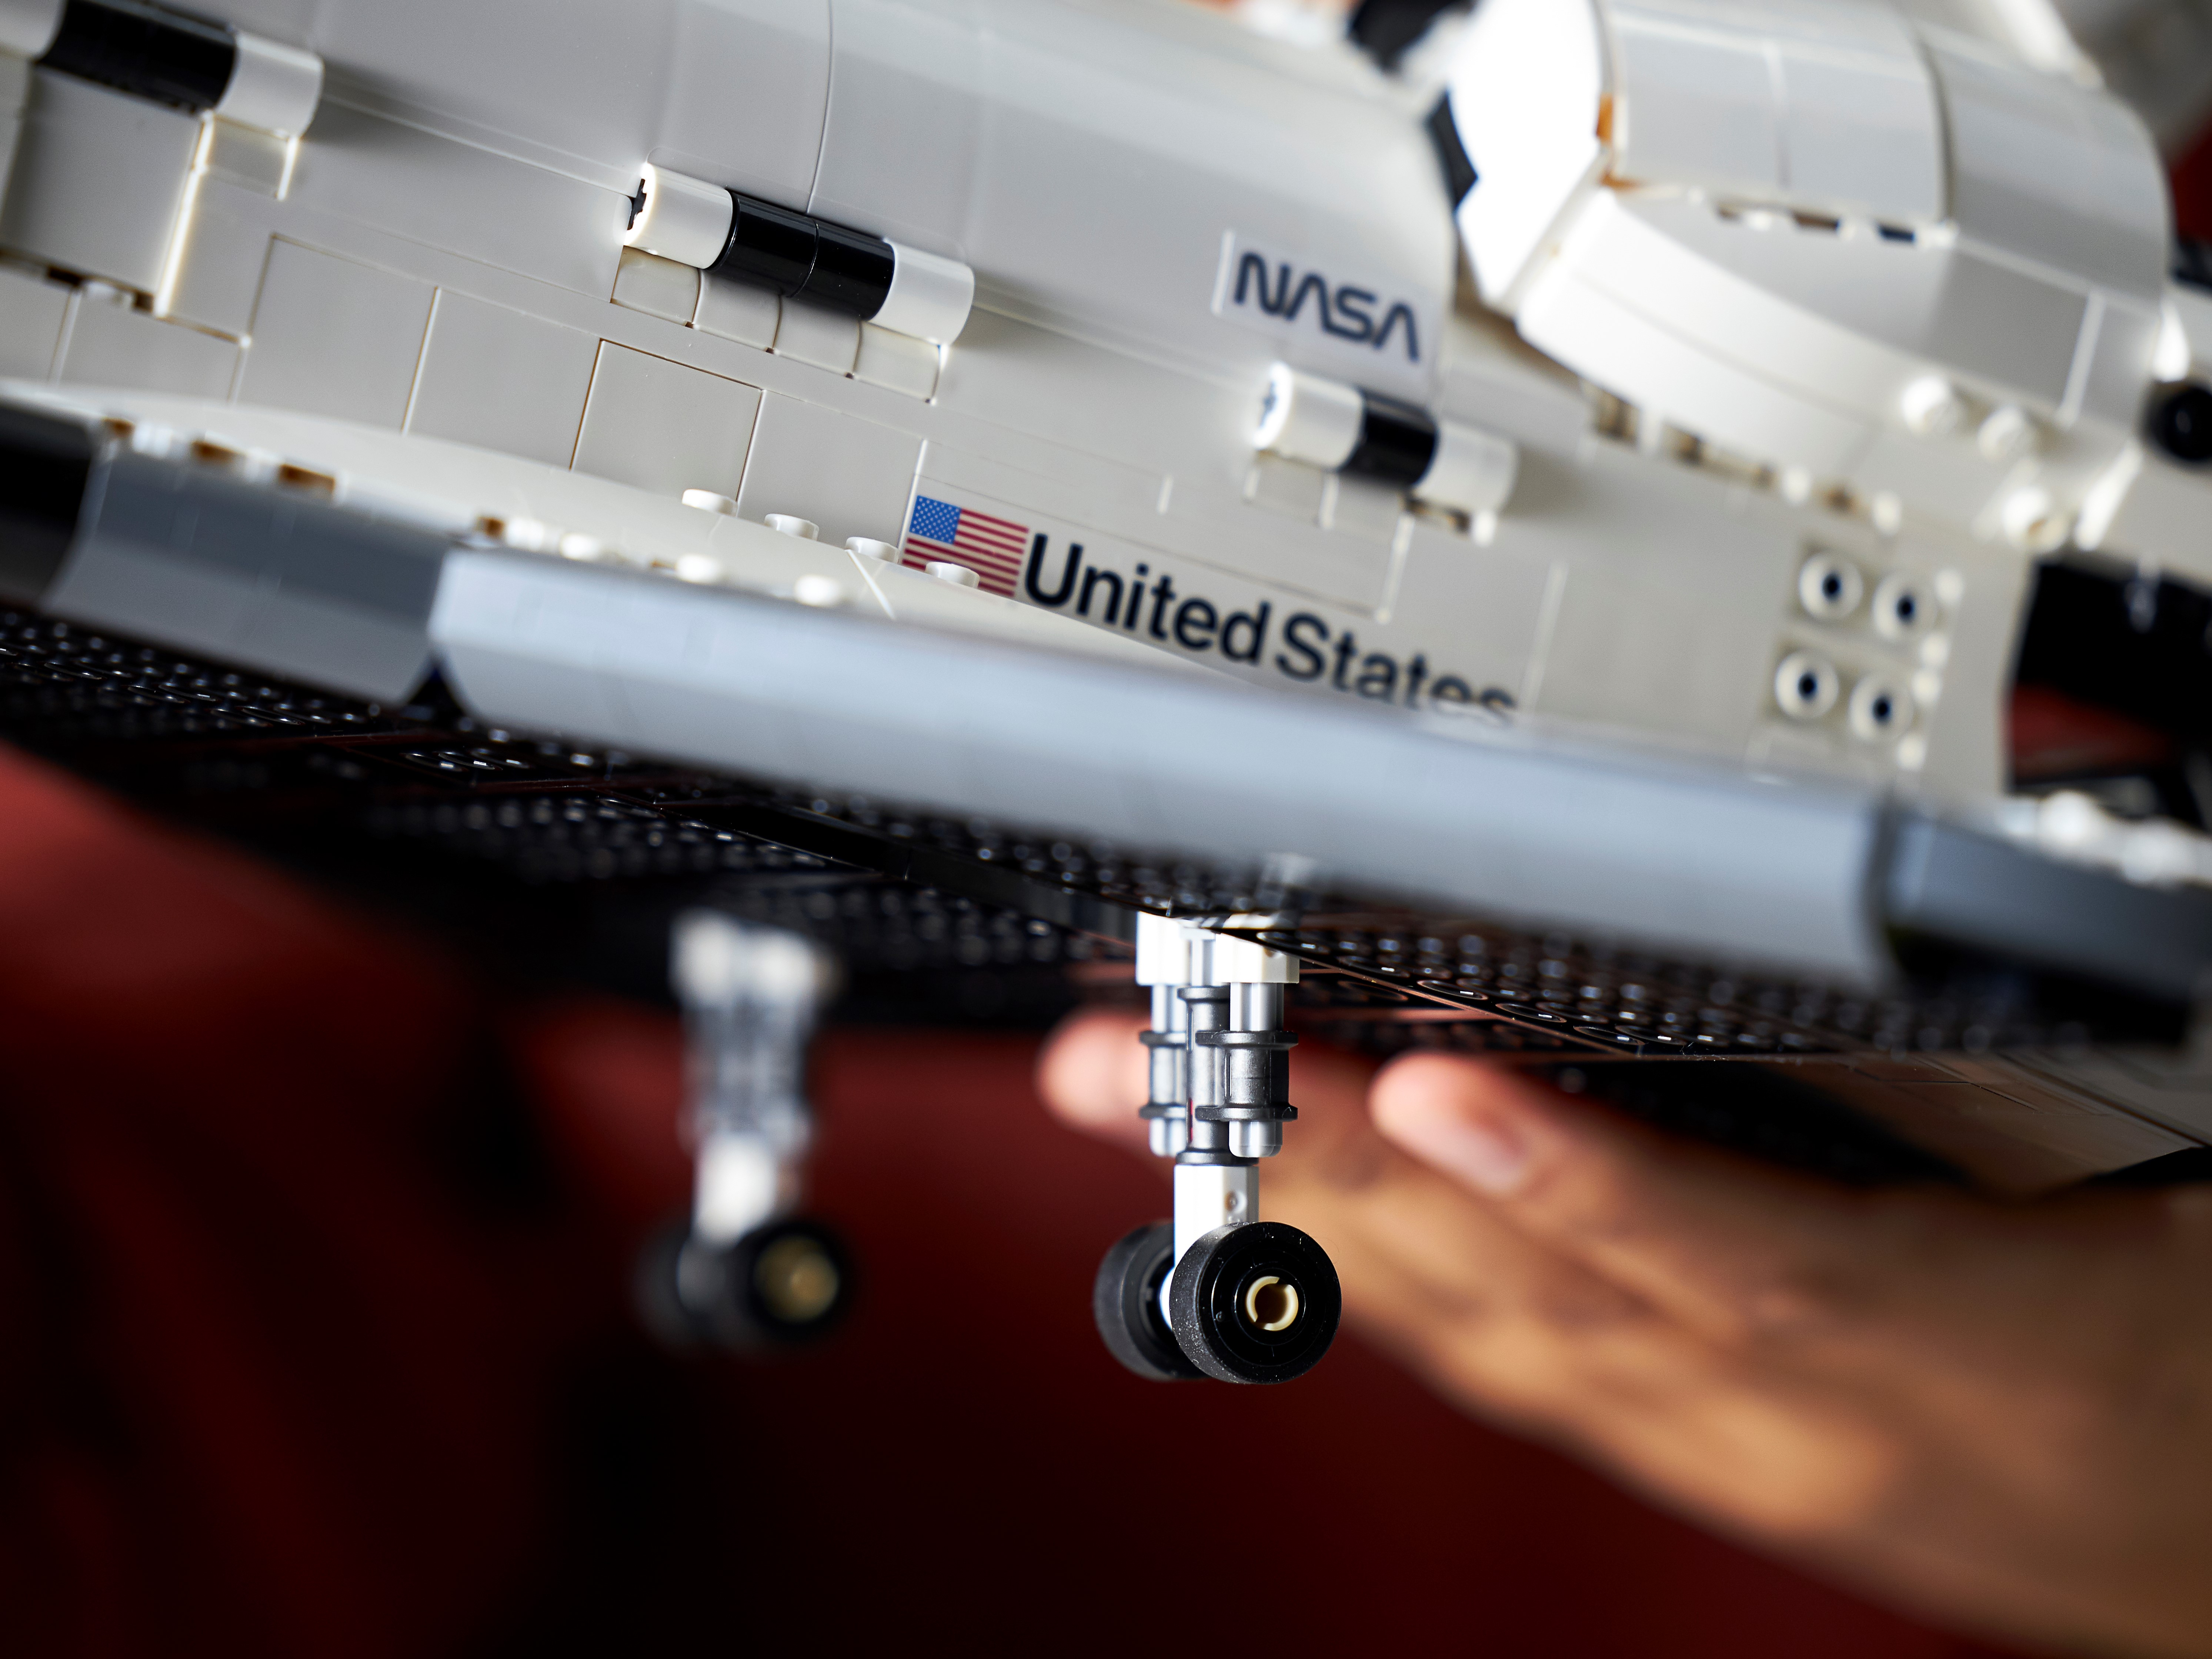 Lego Discovery: Space Shuttle Discovery